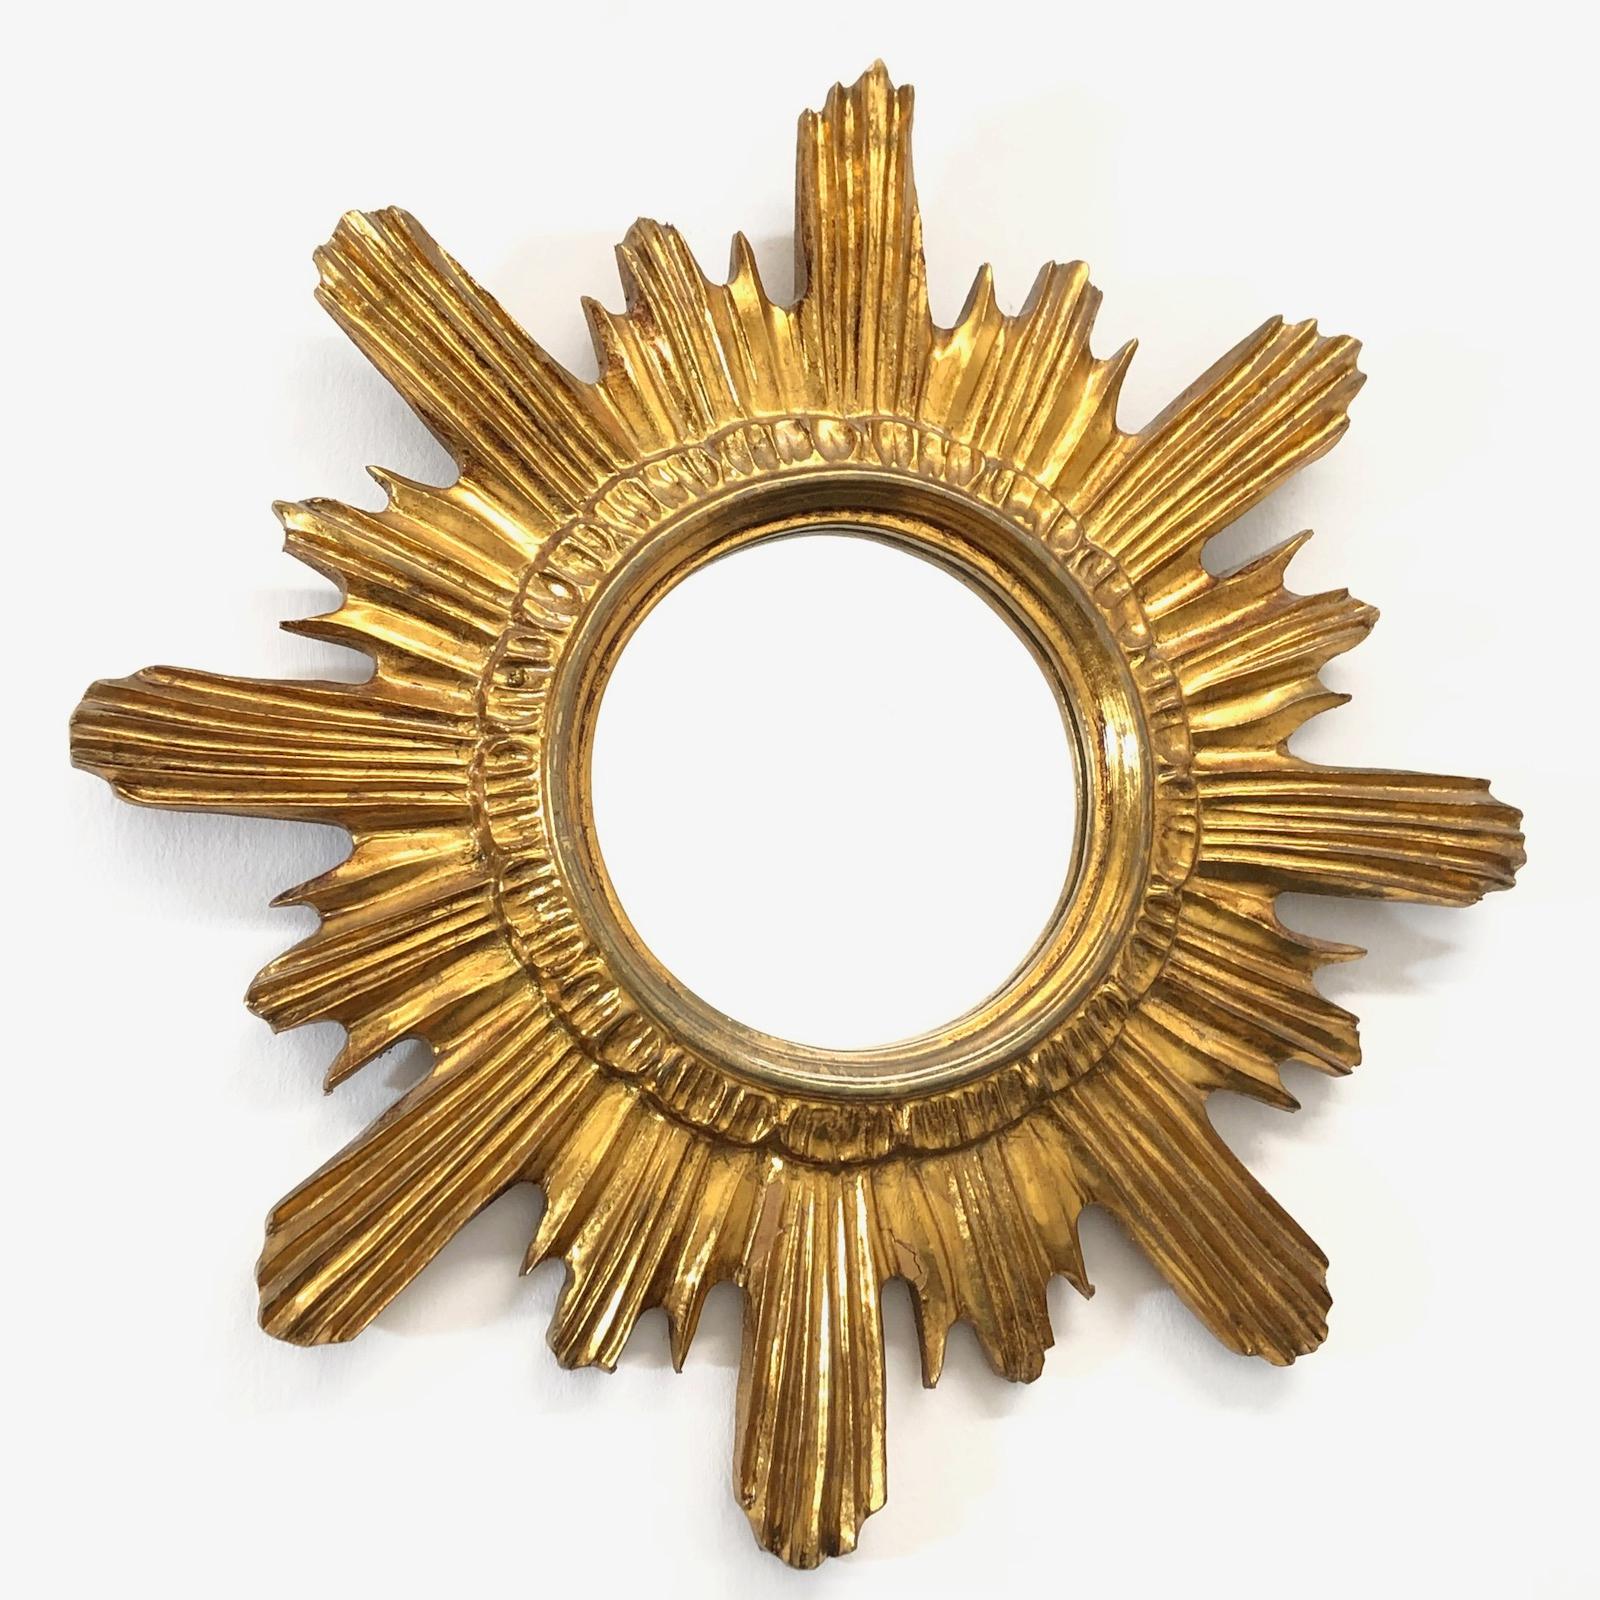 A gorgeous starburst mirror. Made of gilded wood and composition. No chips, no cracks, no repairs. It measures approximate 16 5/8